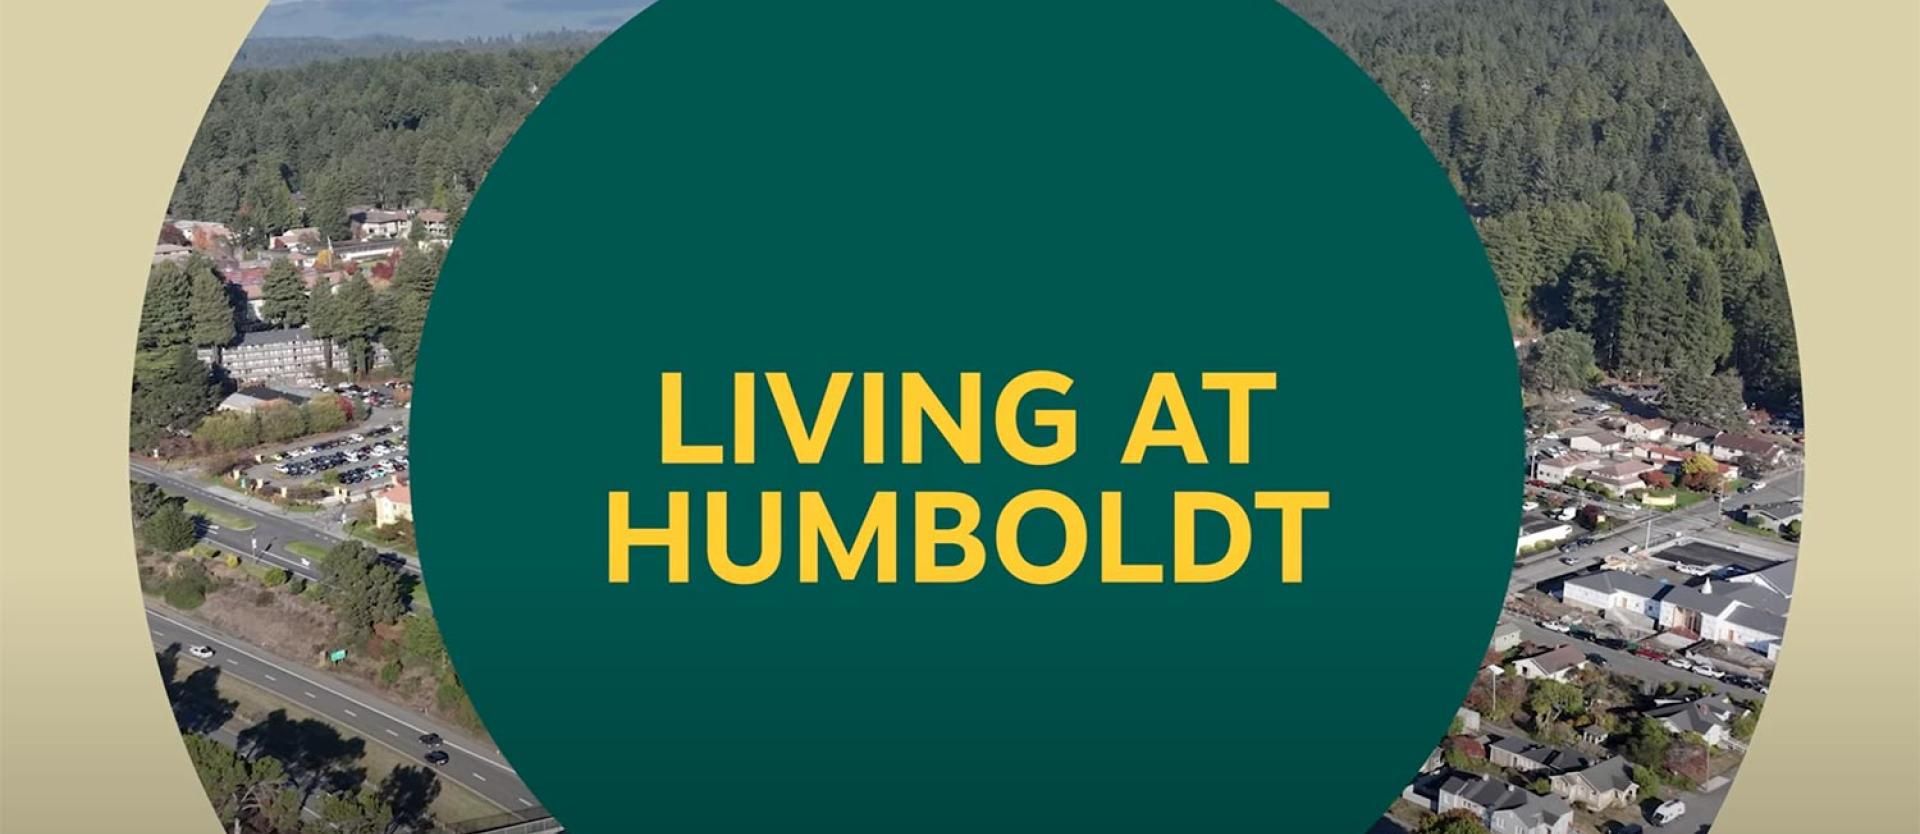 Living at Humboldt video